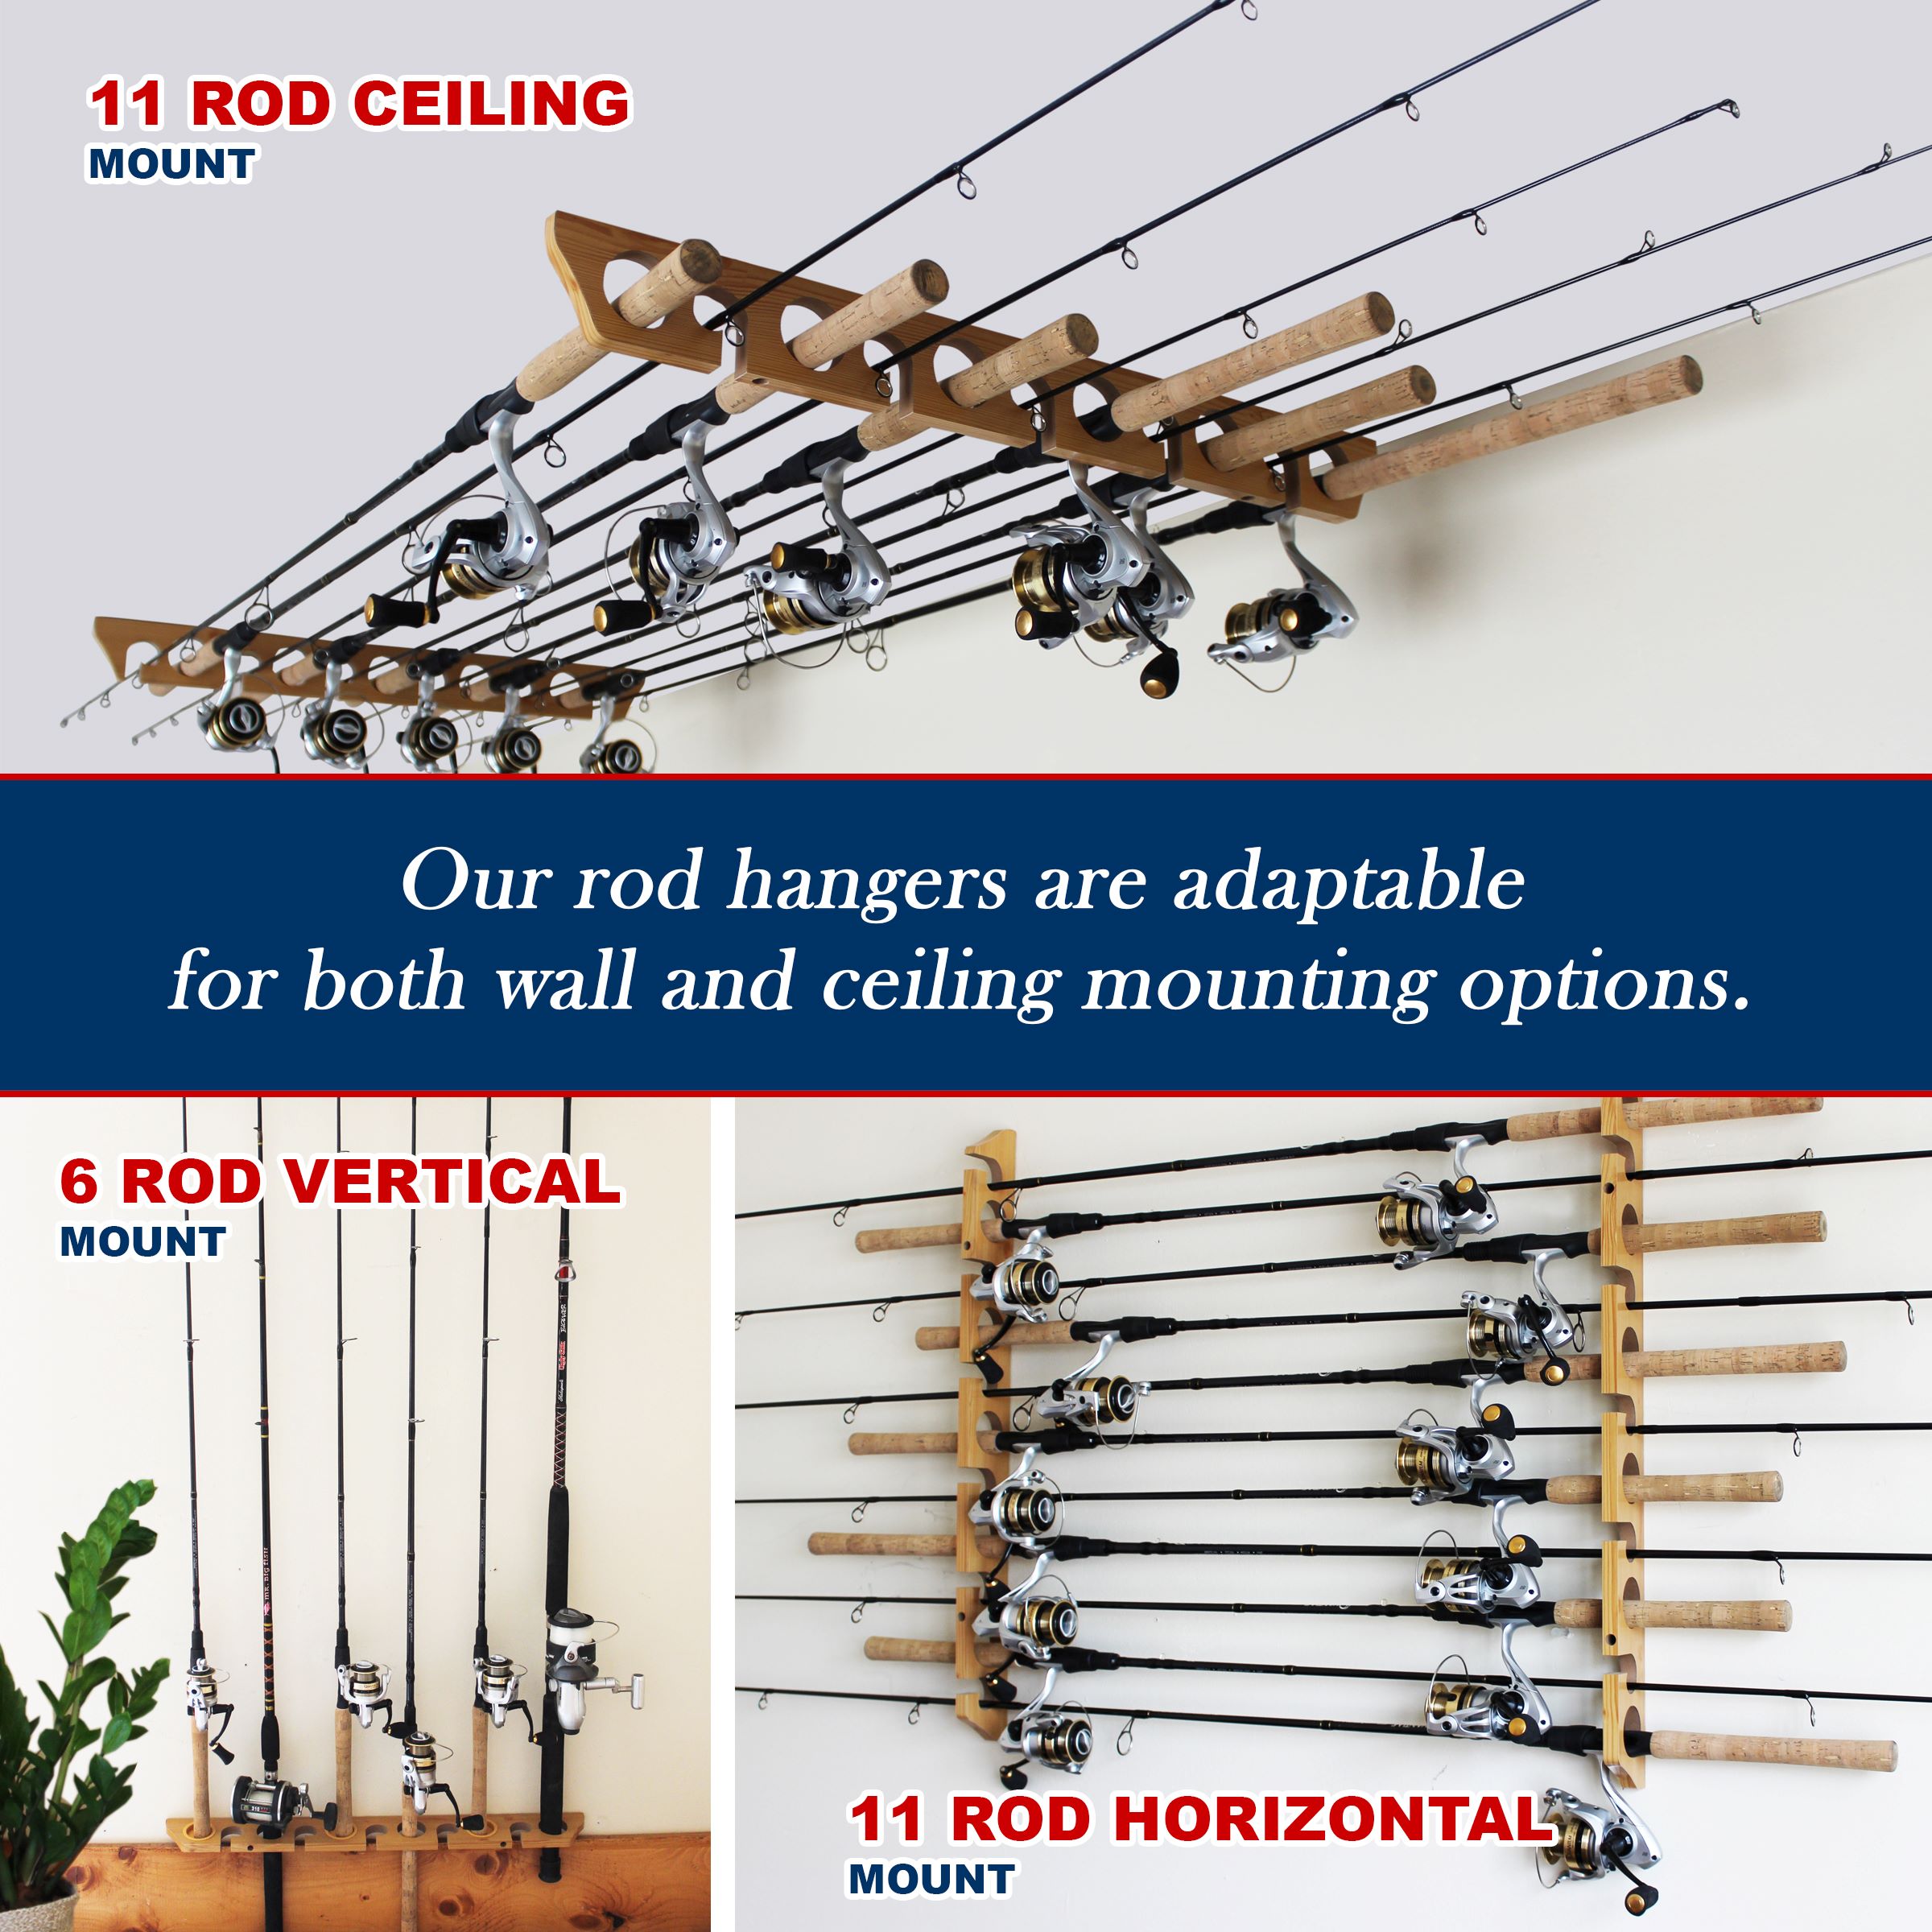 Wall Mounted Rod Rack - Vertical! Get Organized! Built by Rods @ Rest